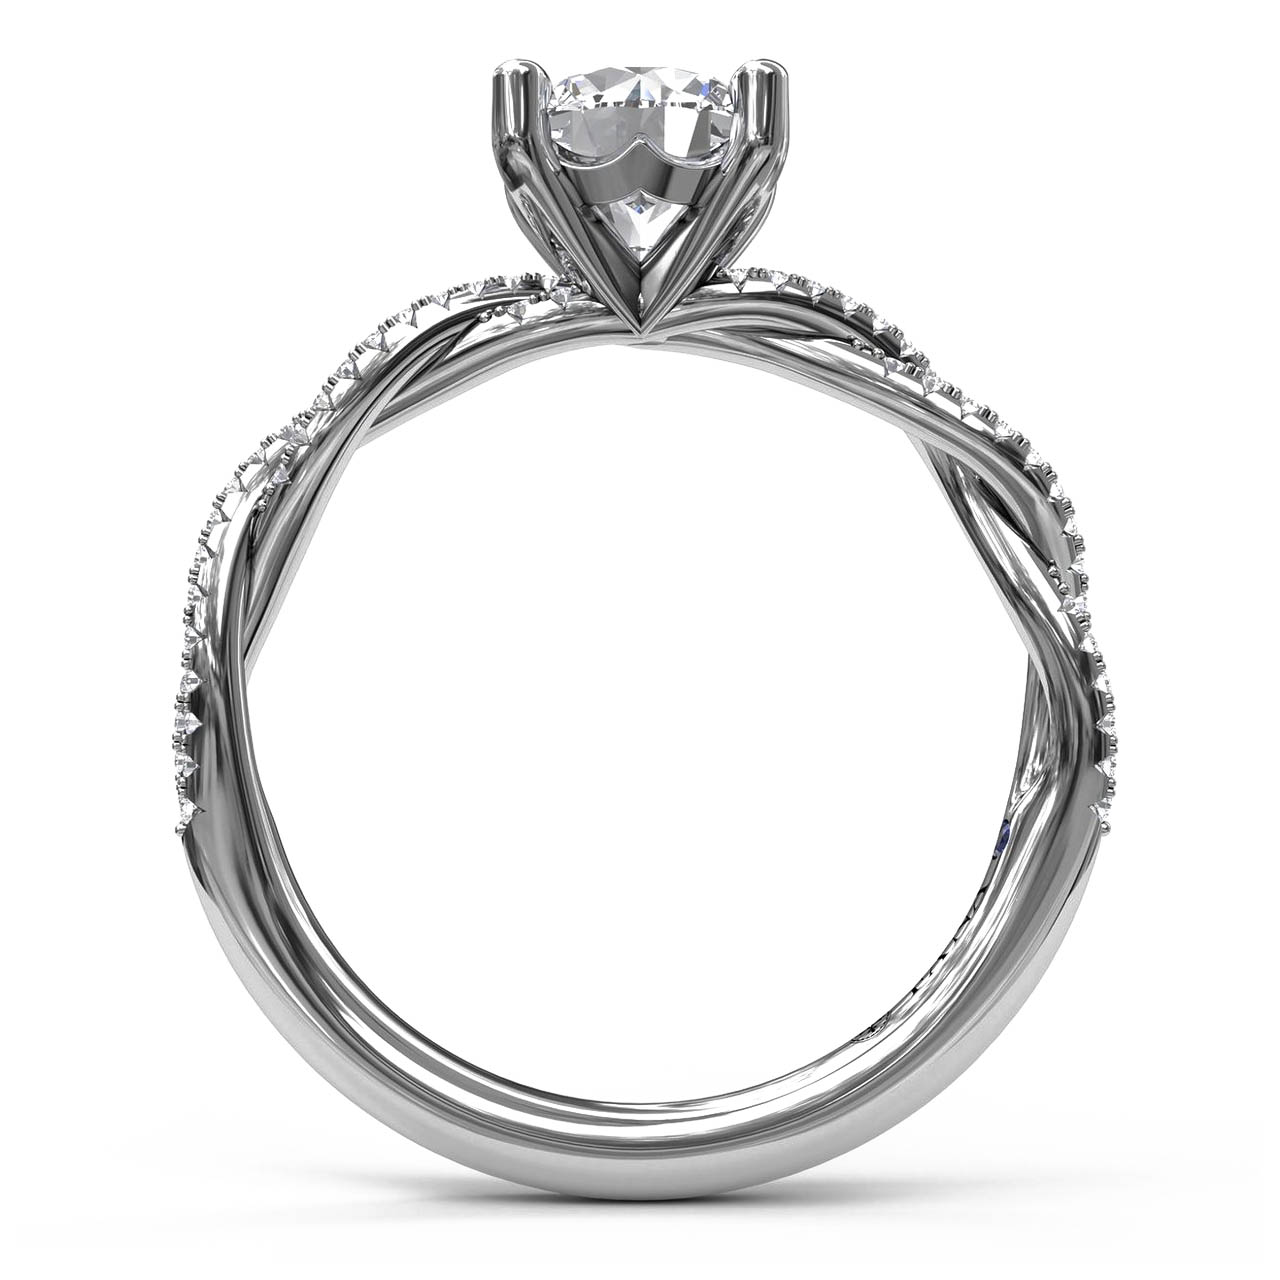 Fana Petite Diamond Twist Engagement Ring Setting in 14kt White Gold (1/5ct tw)